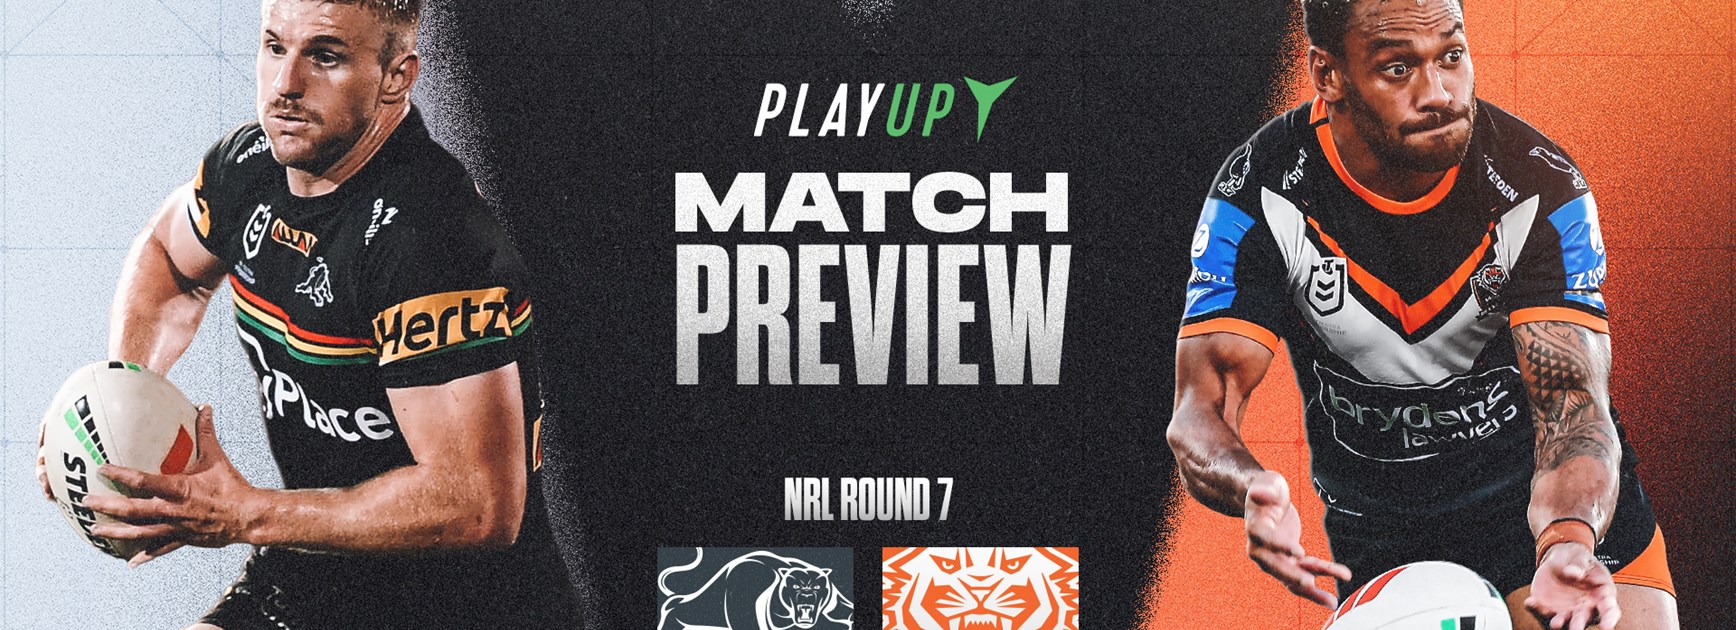 Match Preview: NRL Round 7 vs Panthers